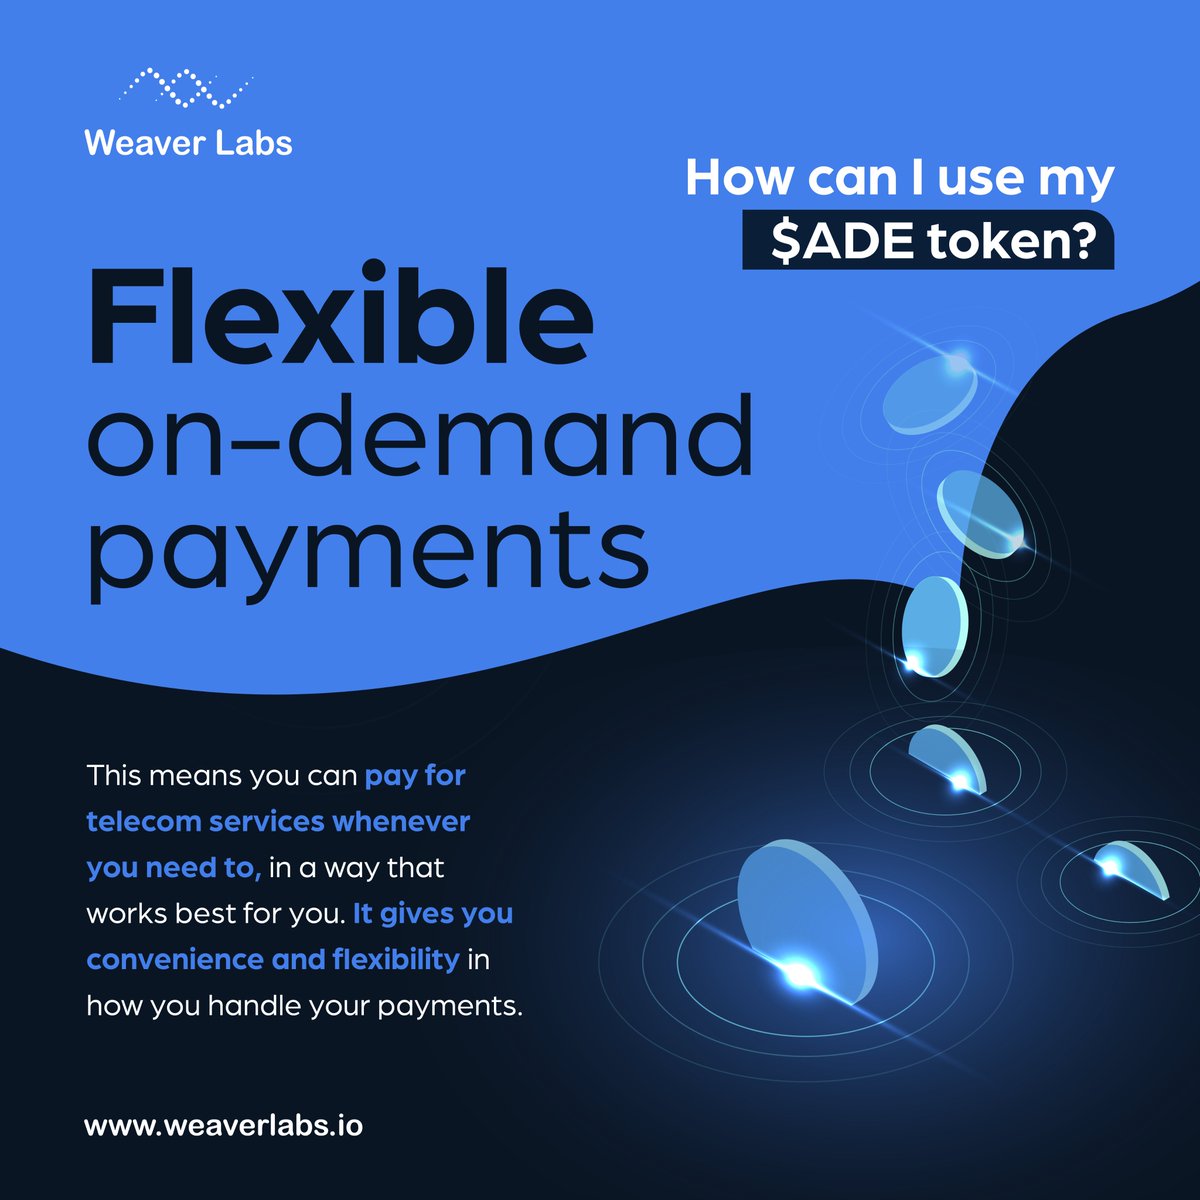 Paying for your connectivity services has never been easier, thanks to $ADE 👏 With its groundbreaking blockchain technology, Adeno introduces a new, flexible way to pay for your services based on your usage. Join the revolution that $ADE is spearheading and get your tokens…